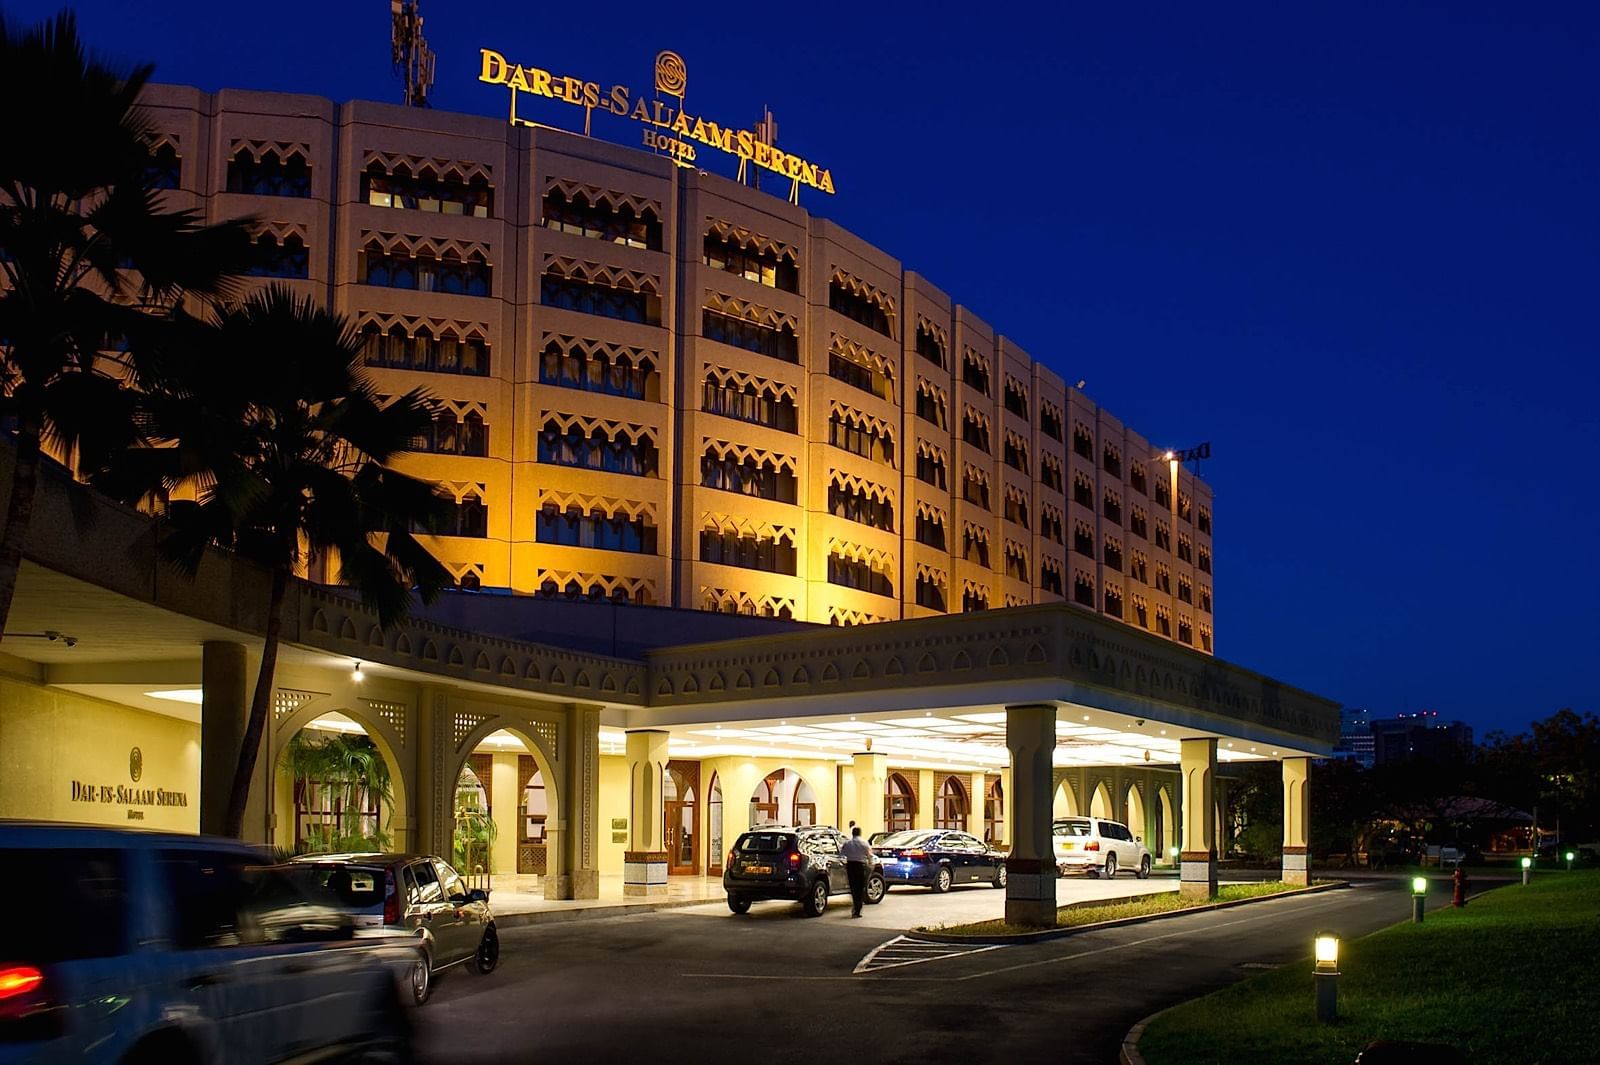 Check-in at Serena Hotel Dar es Salaam for dinner and overnight